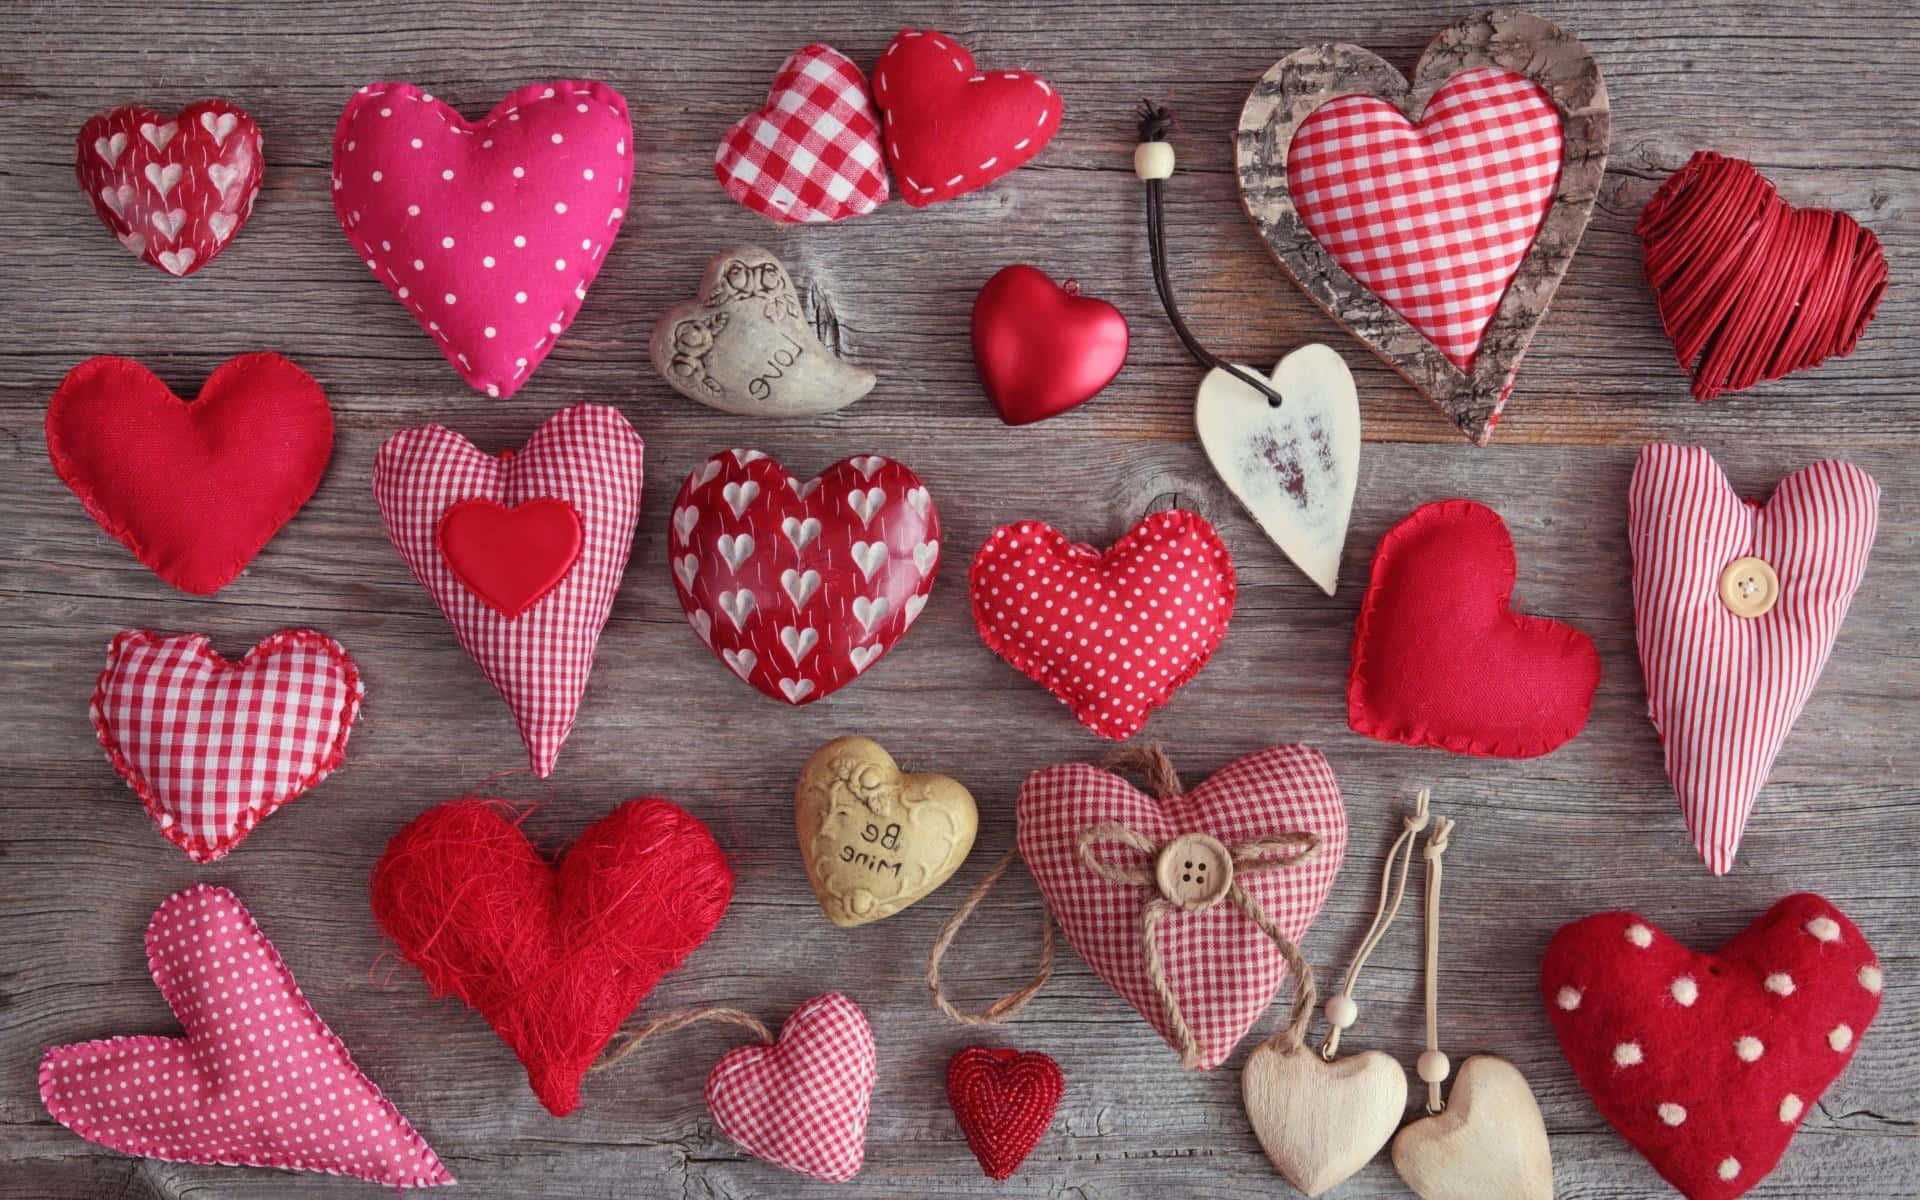 Enjoy a Romantic Valentine's Day with a Rustic Twist Wallpaper